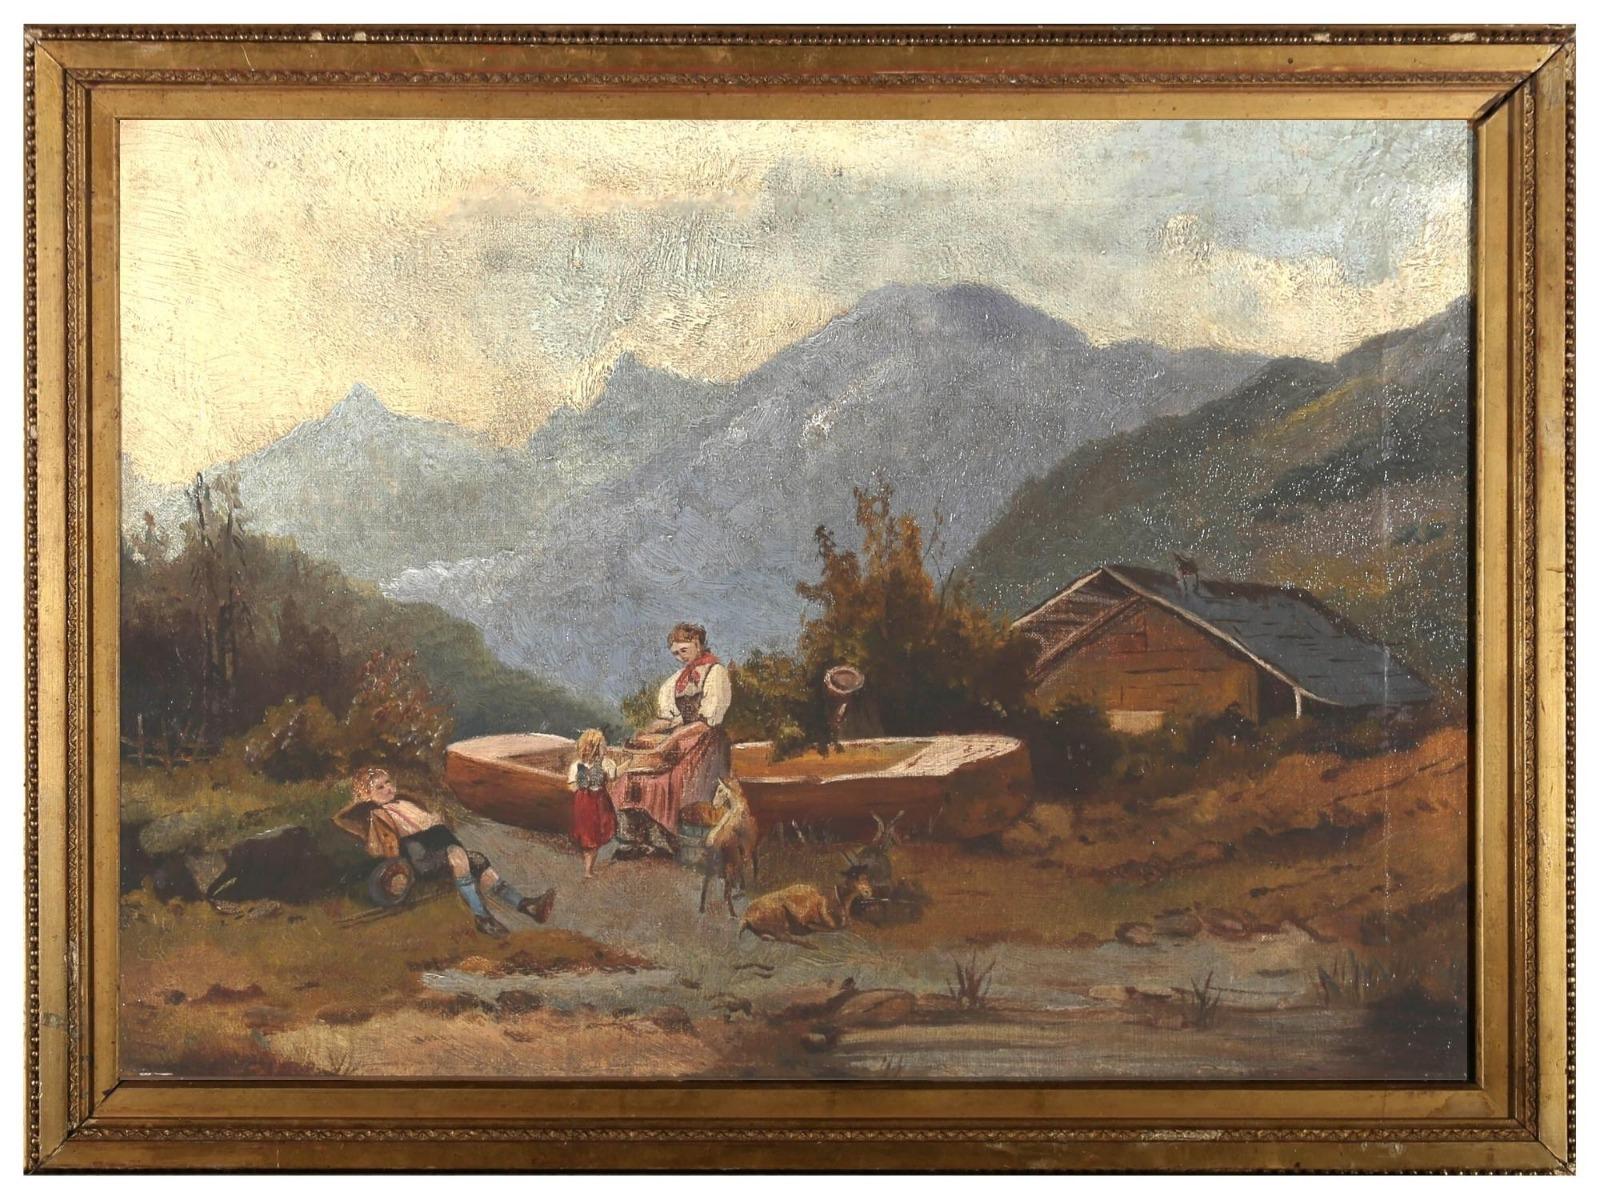 Unknown Landscape Painting - Framed Late 19th Century Oil - Rural Living